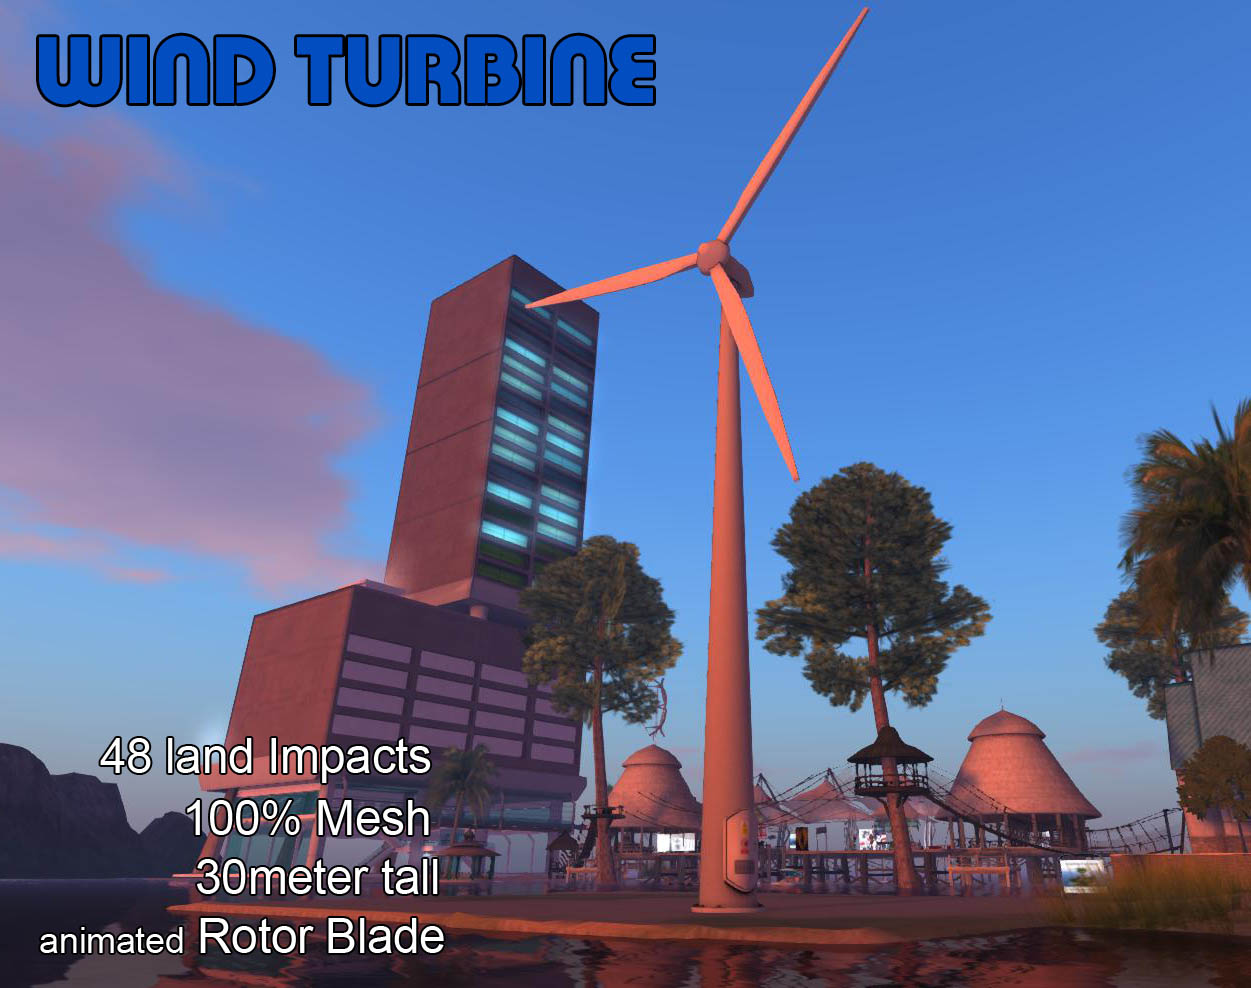 New Item For This Month 30 meter Tall Wind Turbine [Full